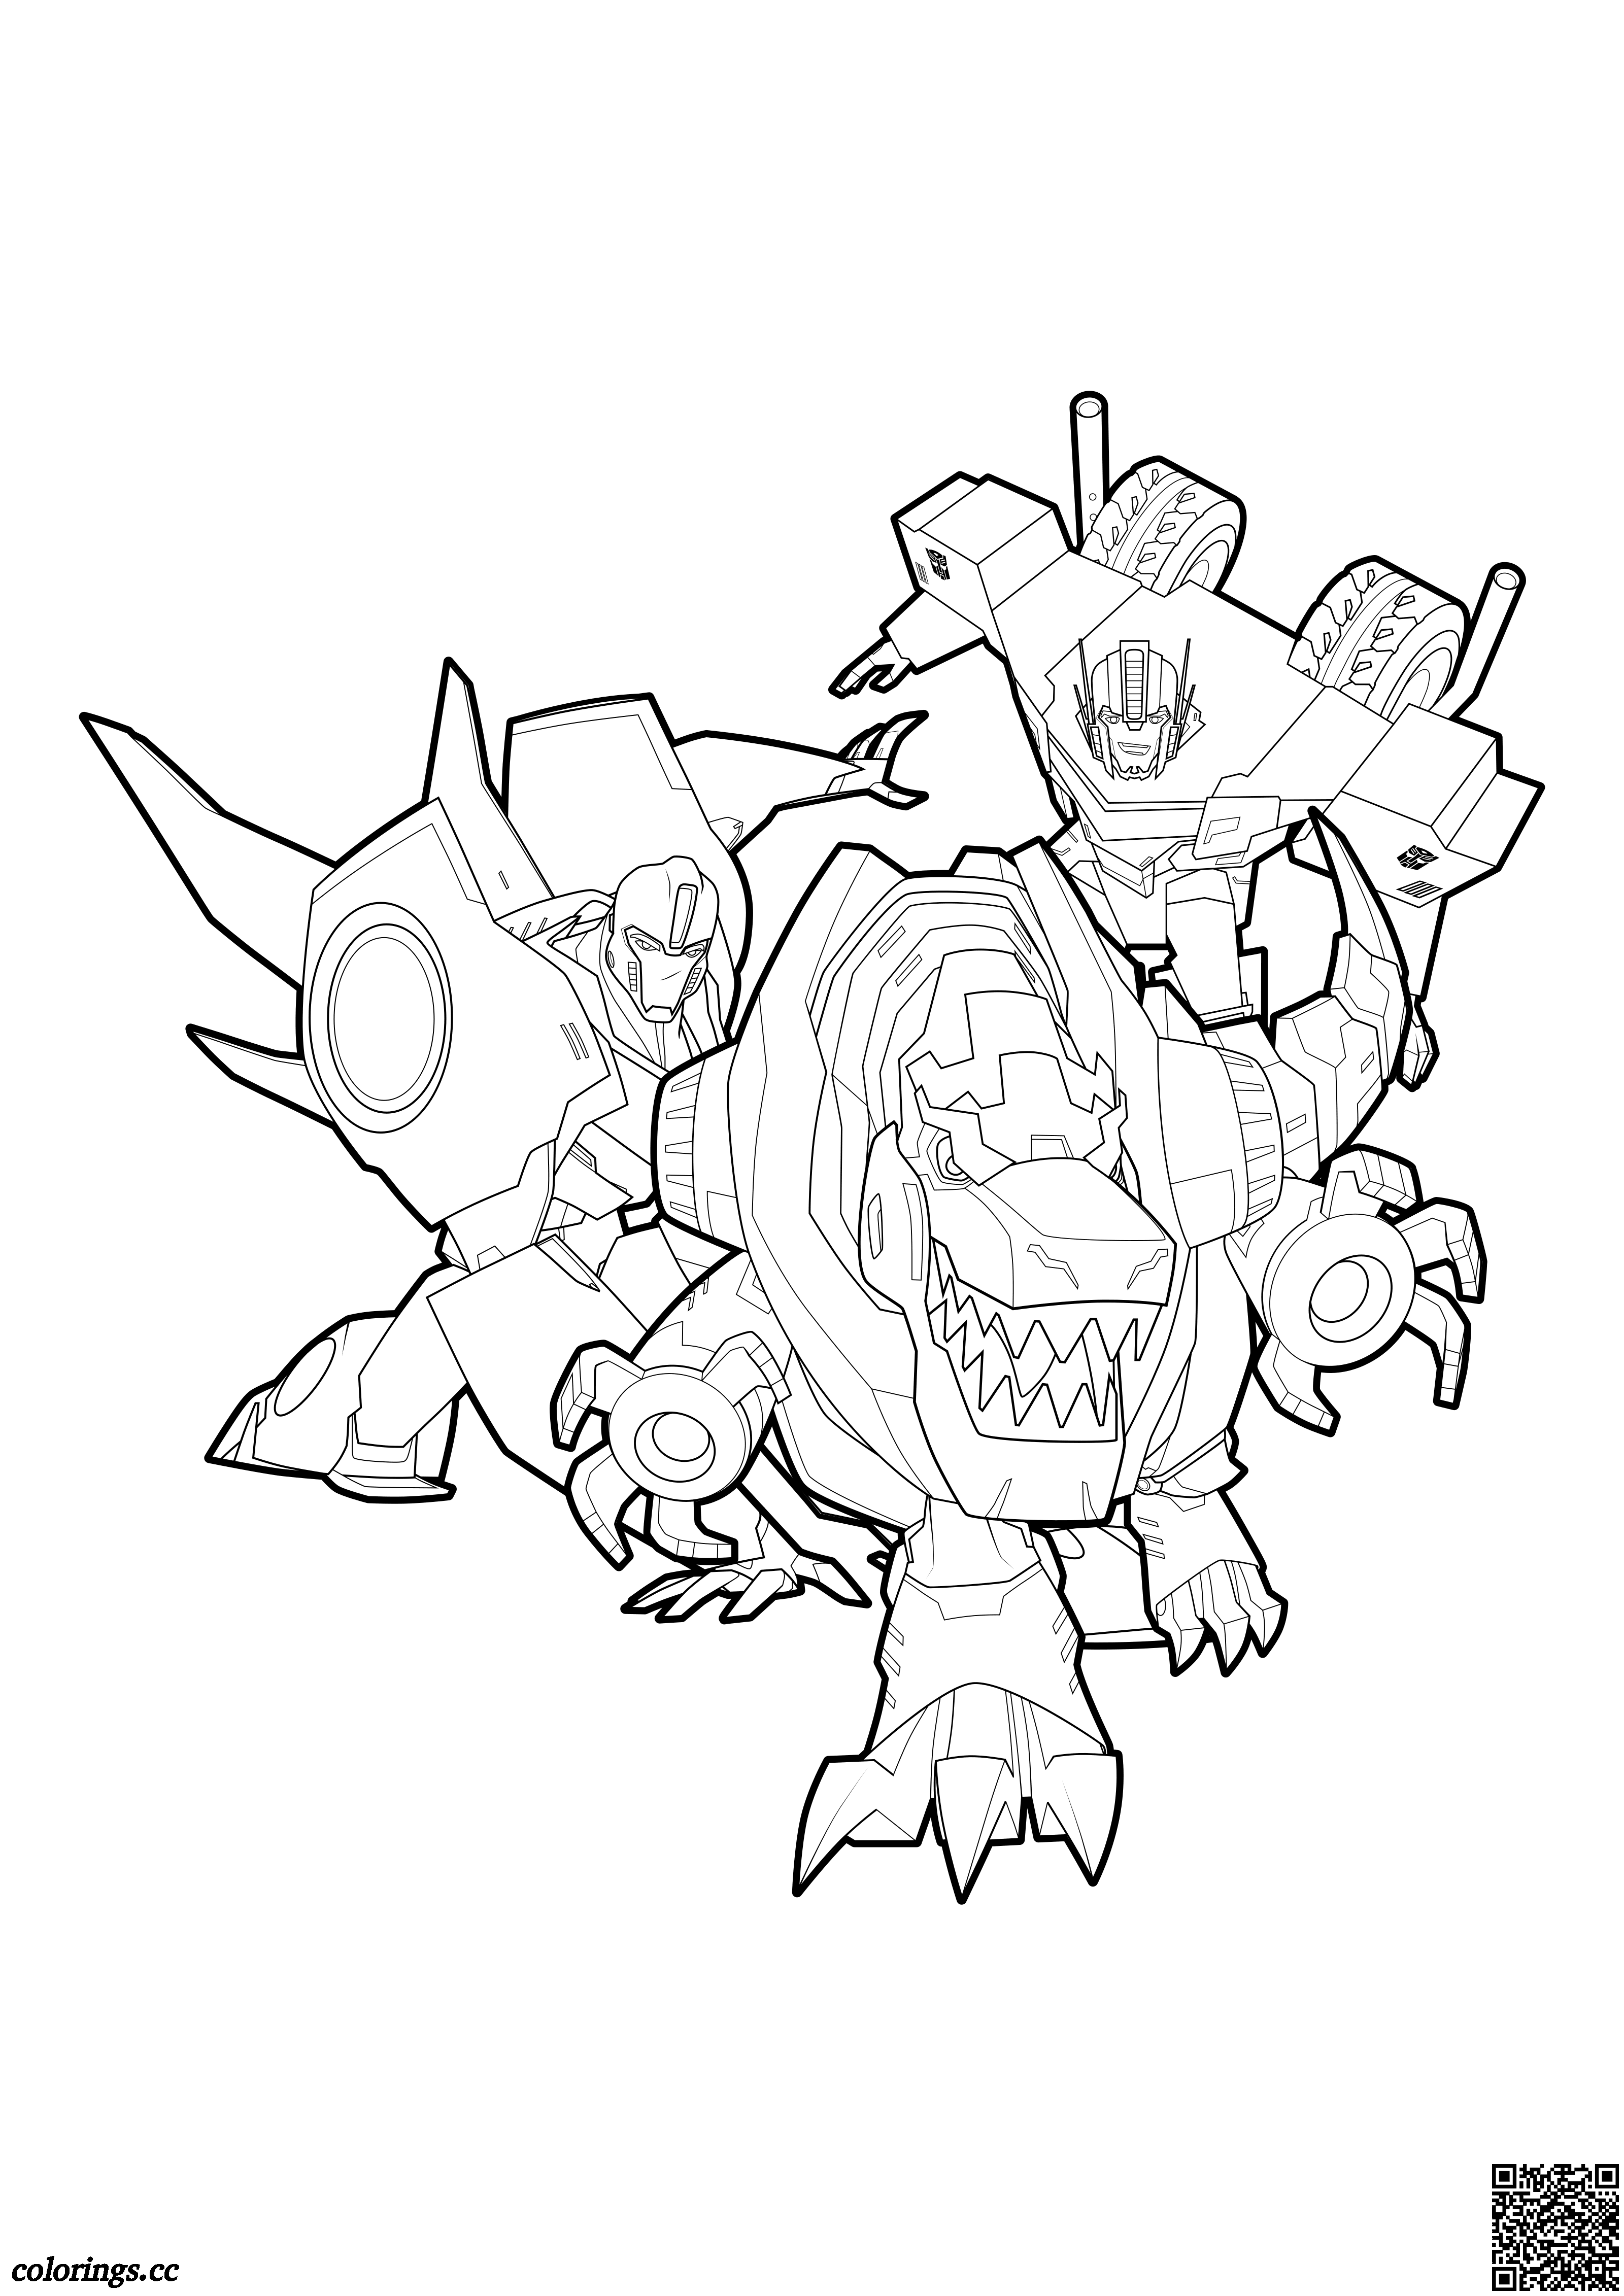 Bumblebee, Grimlock and Optimus Prime coloring pages, Transformers ...